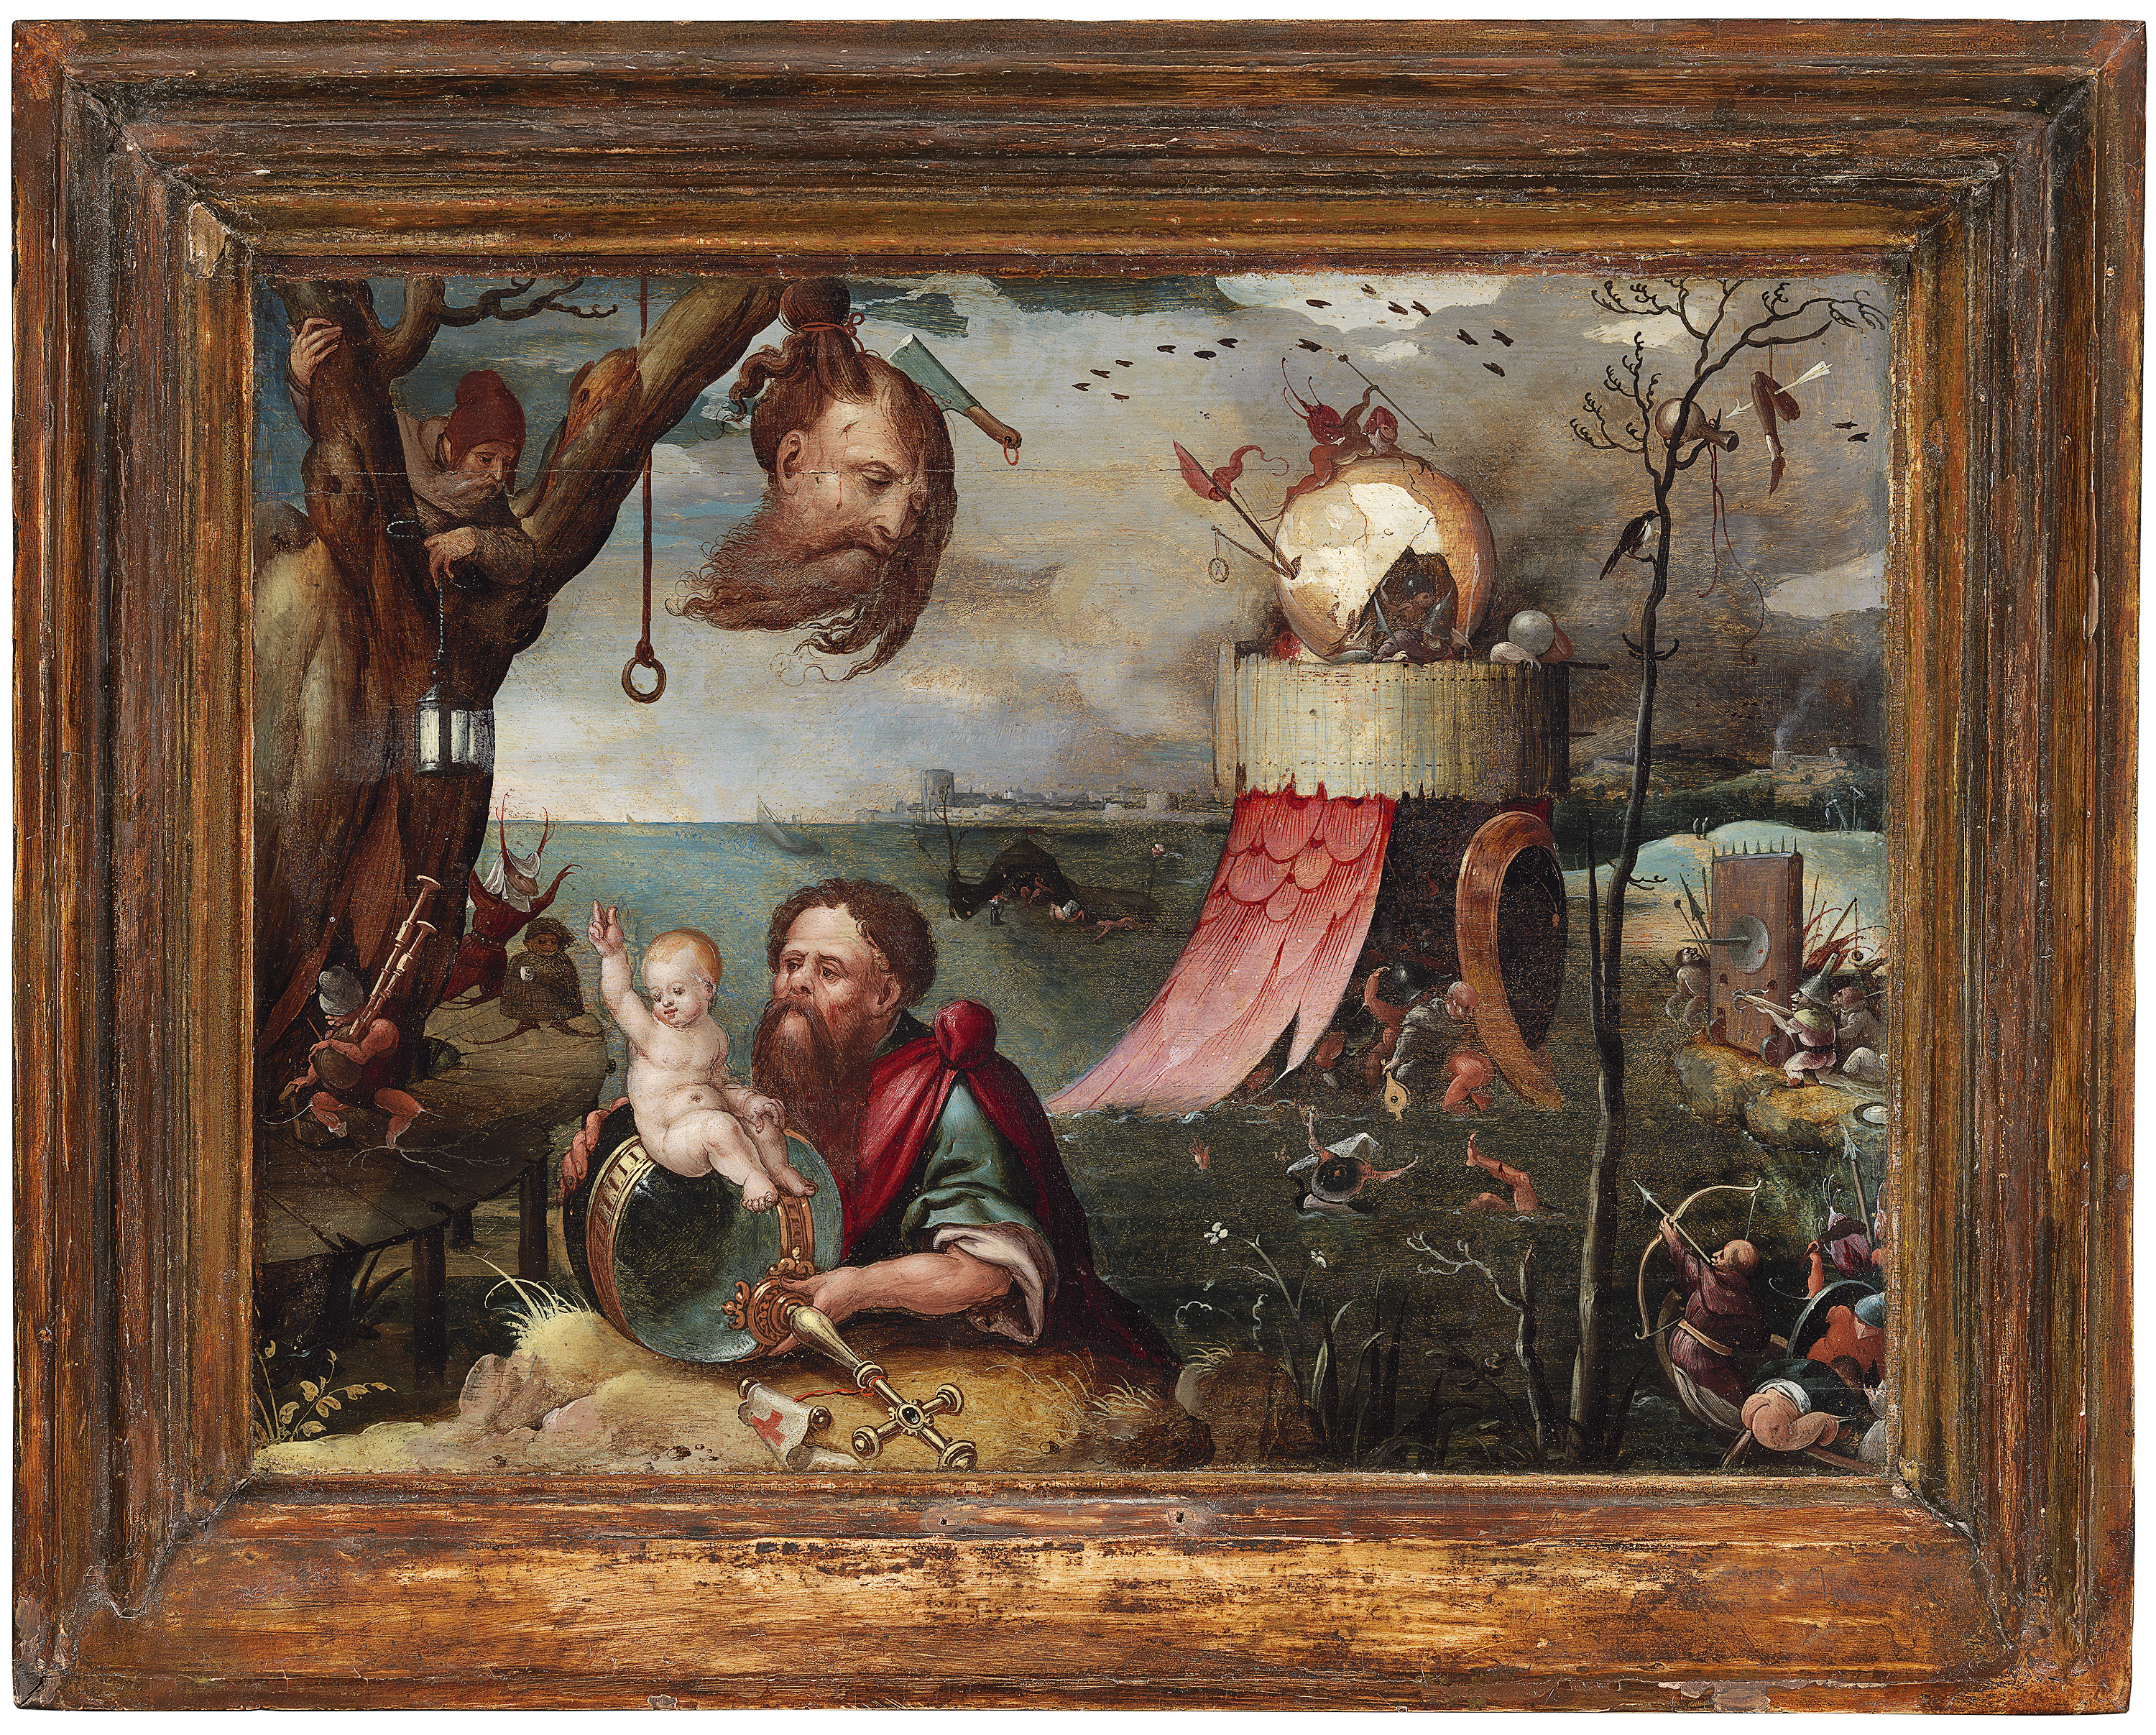 A 16th century painting depicting a man with a baby in front of the ocean. A severed head hangs from a tree to the left.